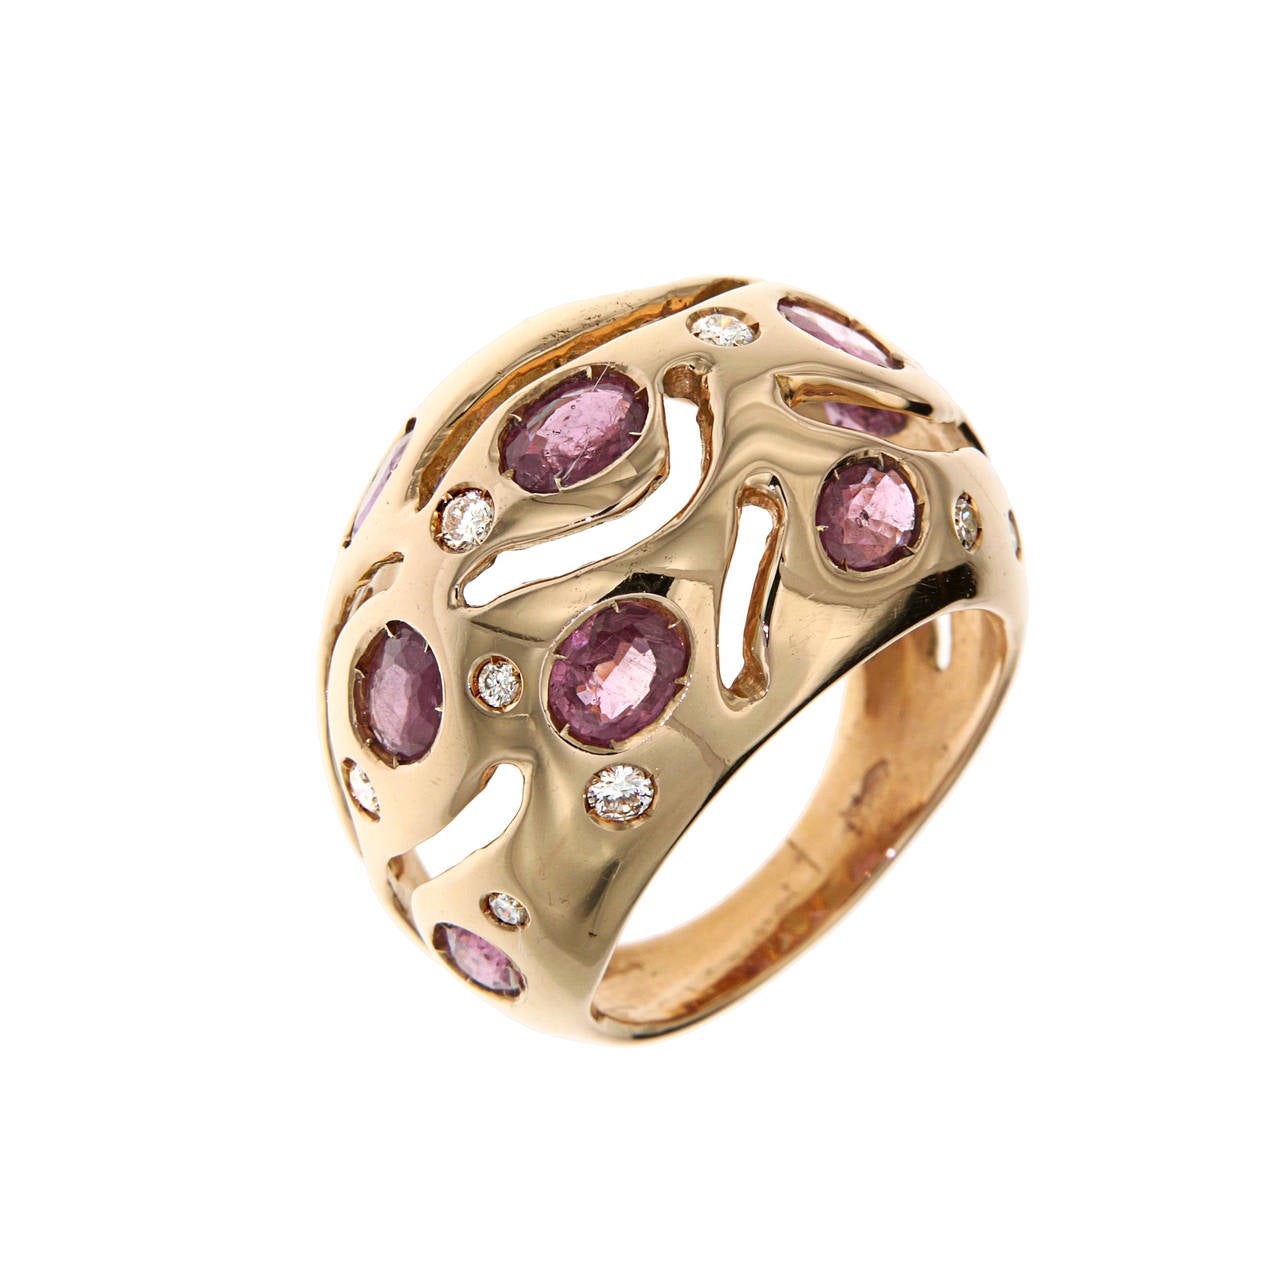 Red Rubies Diamonds 18 Karat Rose Gold Cocktail Ring Handcrafted In Italy